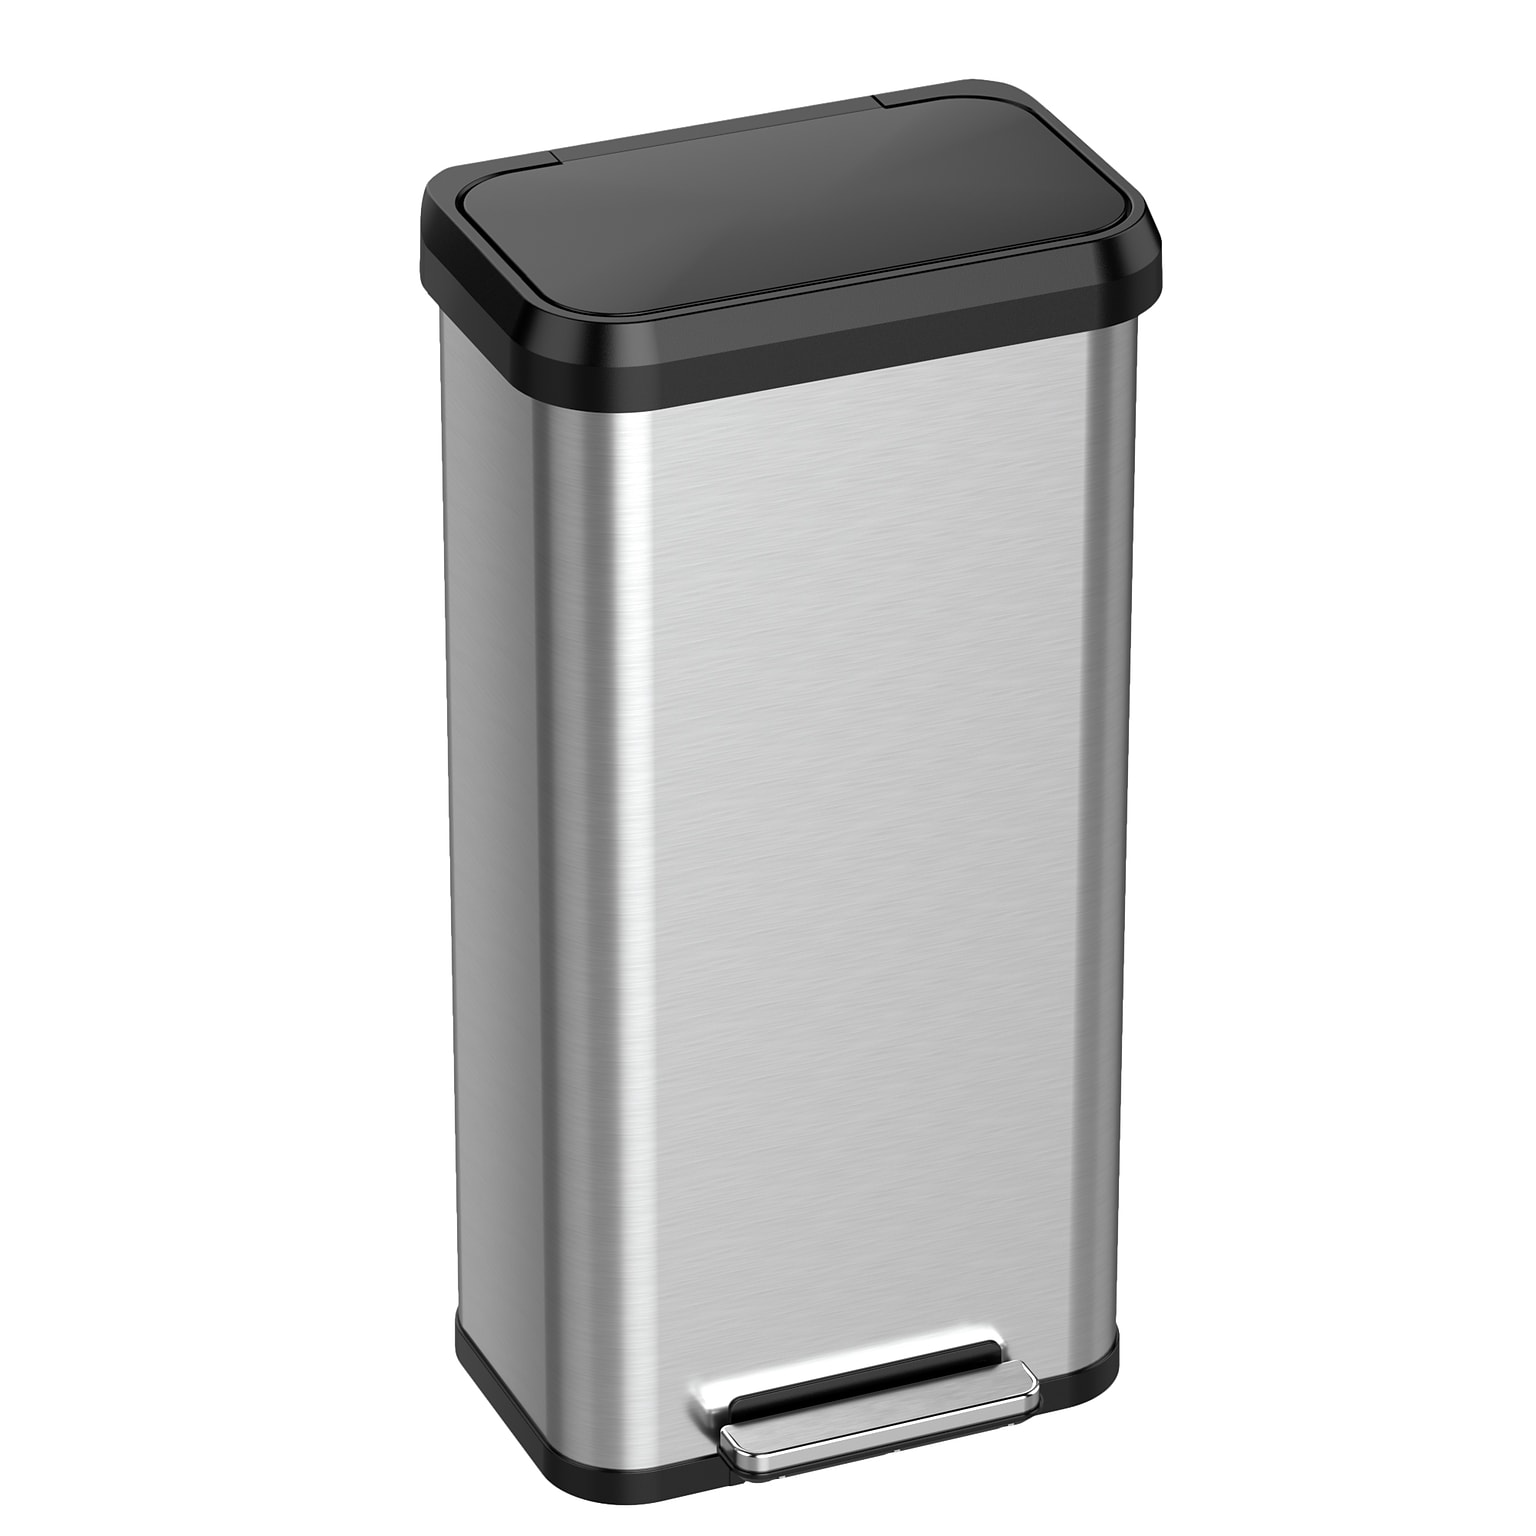 iTouchless SoftStep EXP Stainless Steel Step Trash Can with Plastic Lid, 20 Gallon, Silver/Black (PP20RSB)